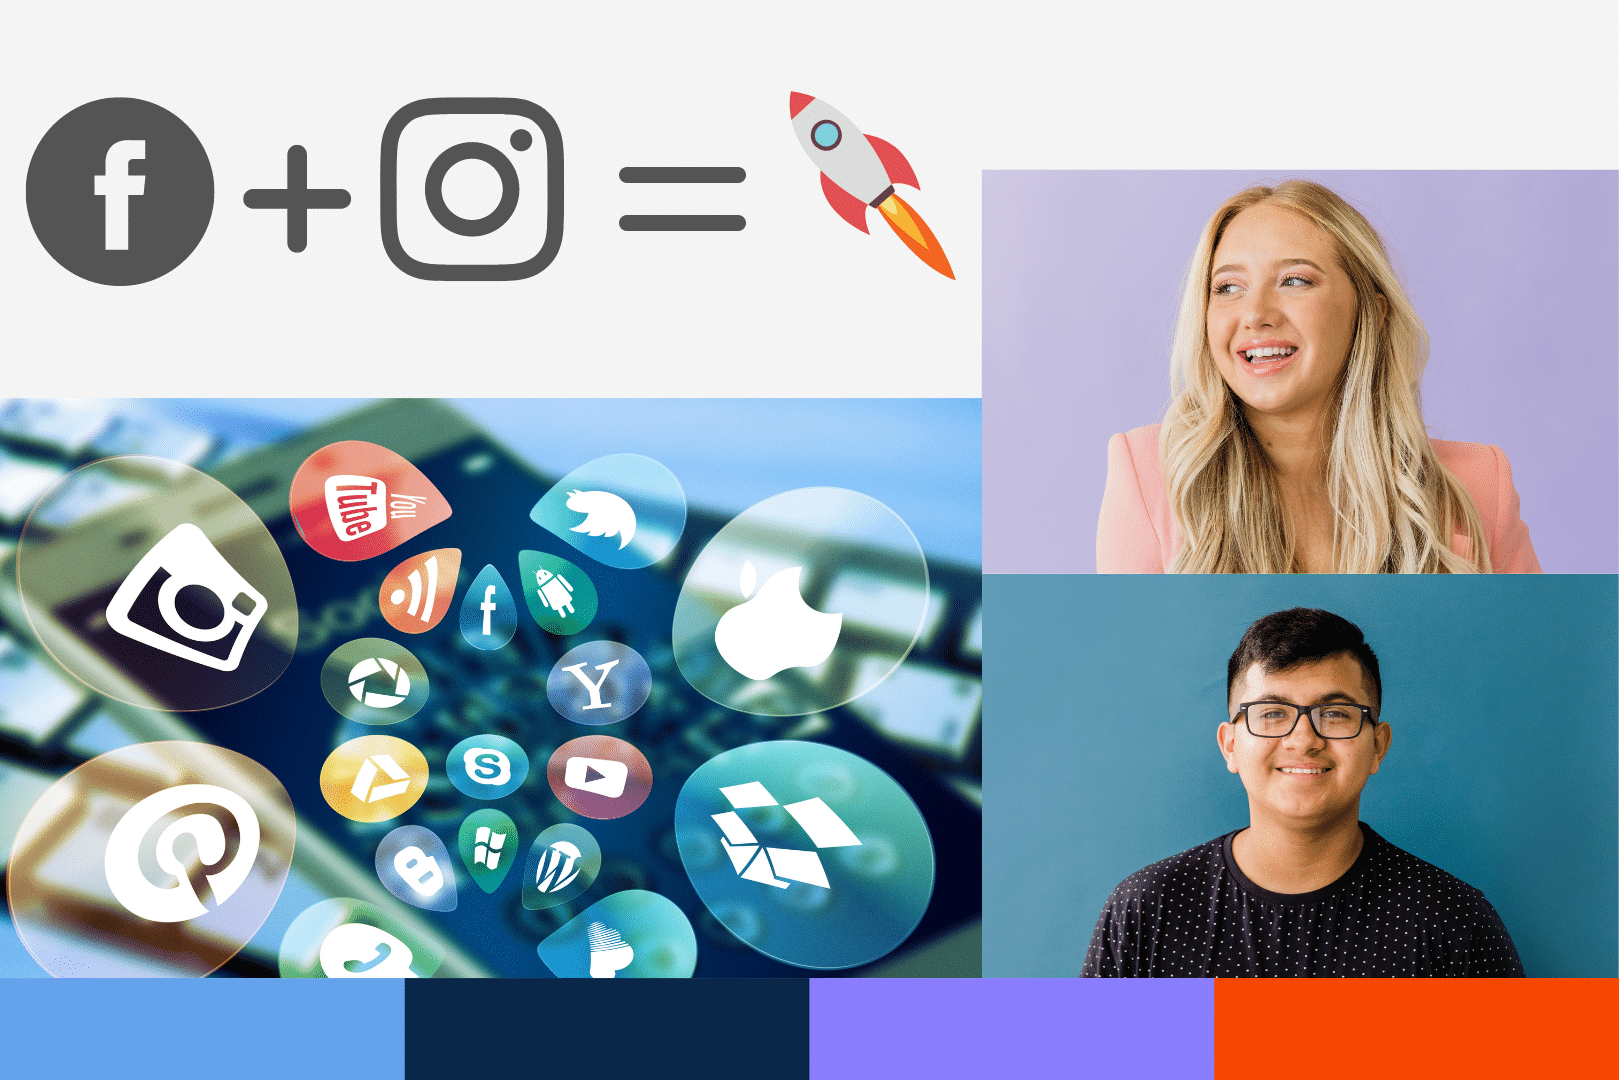 Facebook logo + Instagram Logo with 2 People on the right side.